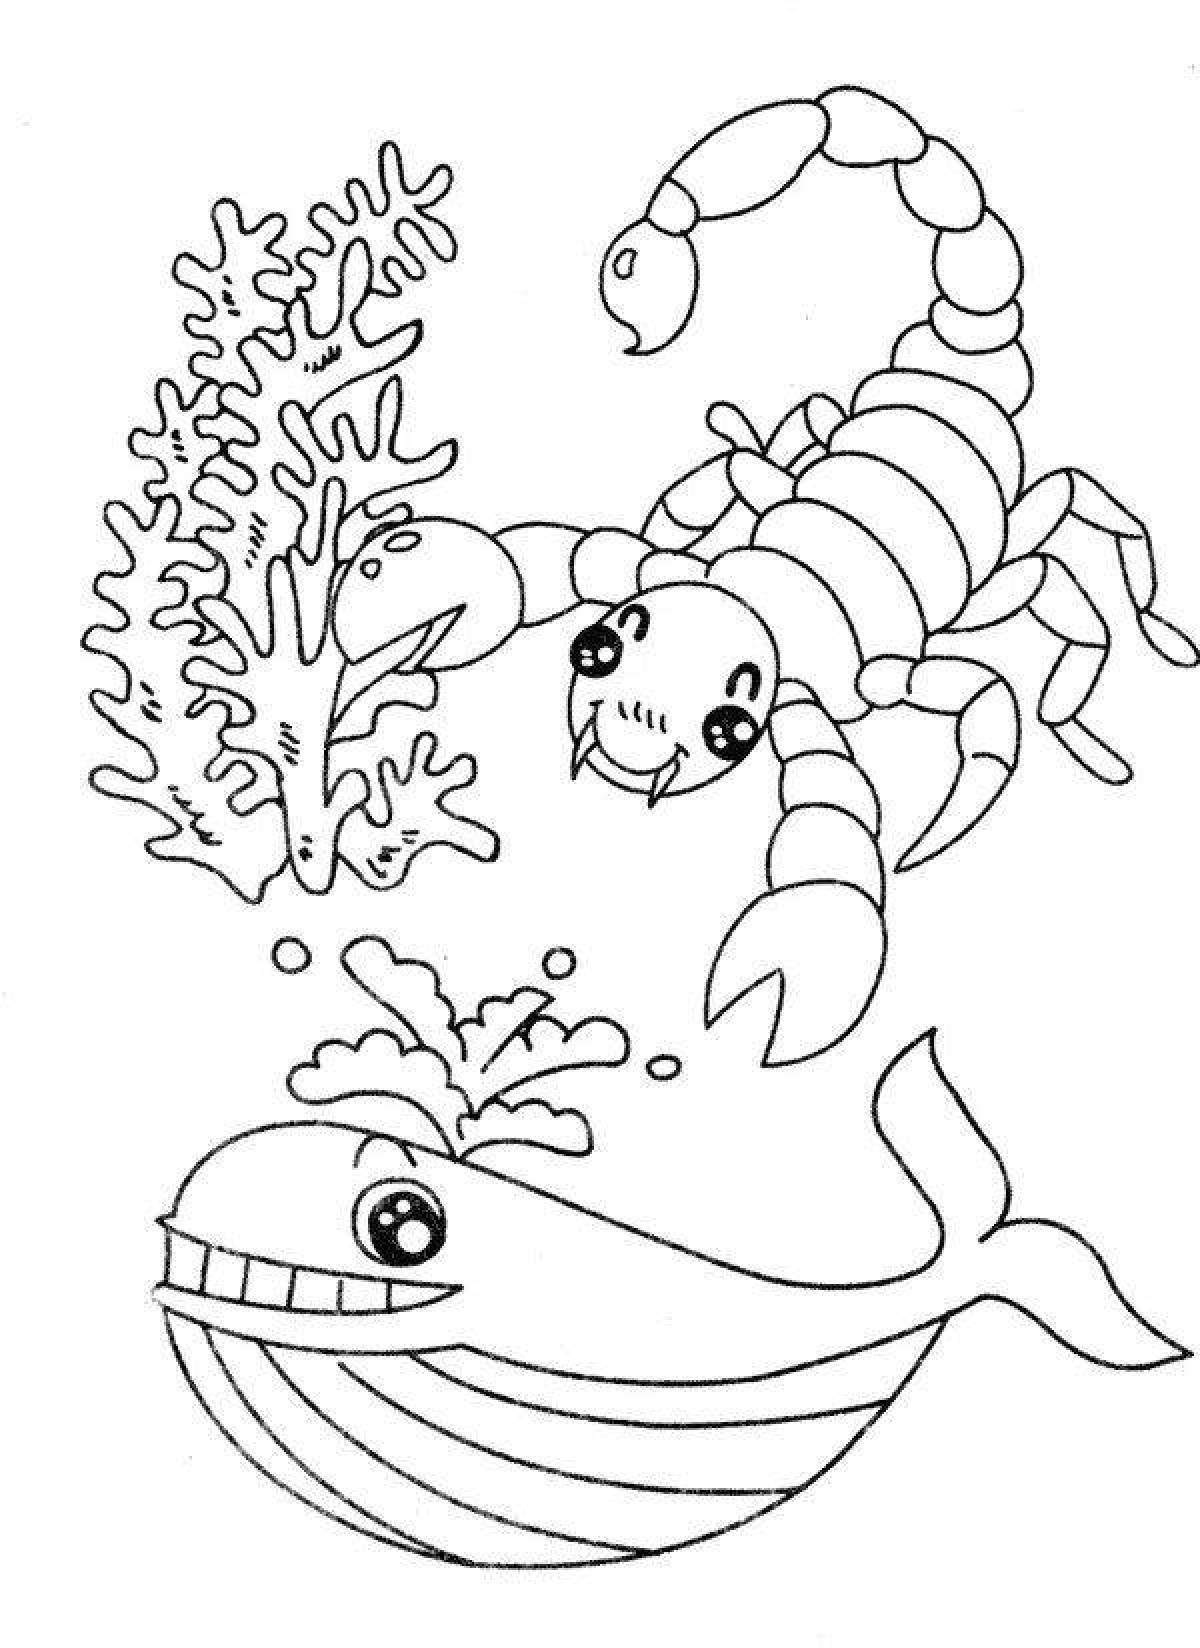 Colorful marine life coloring book for children 6-7 years old